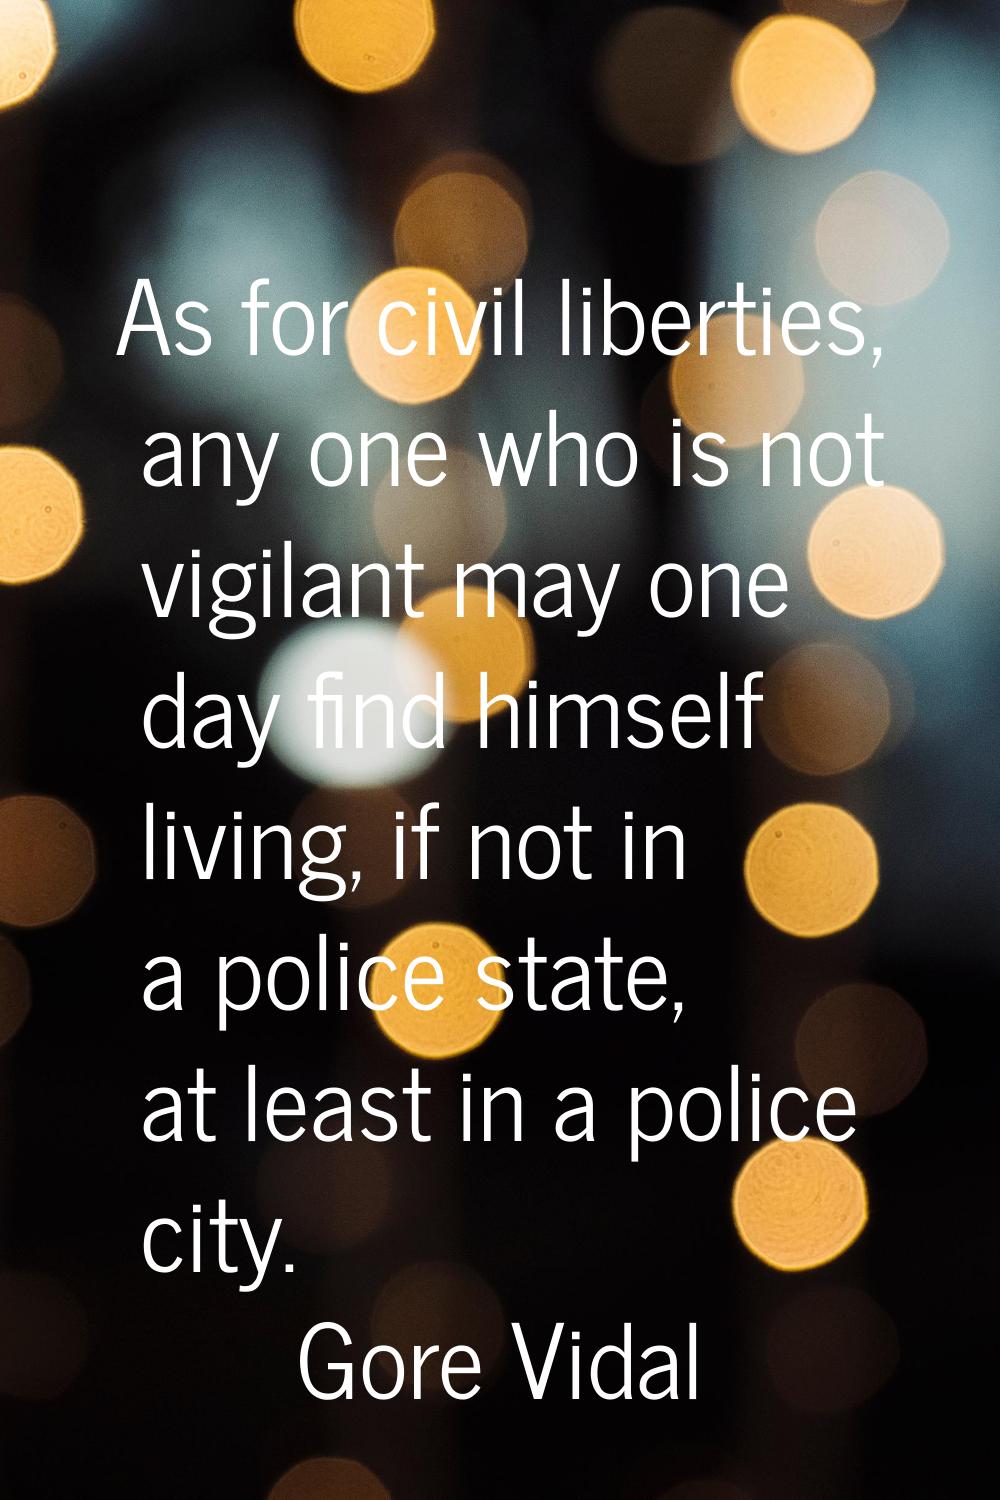 As for civil liberties, any one who is not vigilant may one day find himself living, if not in a po